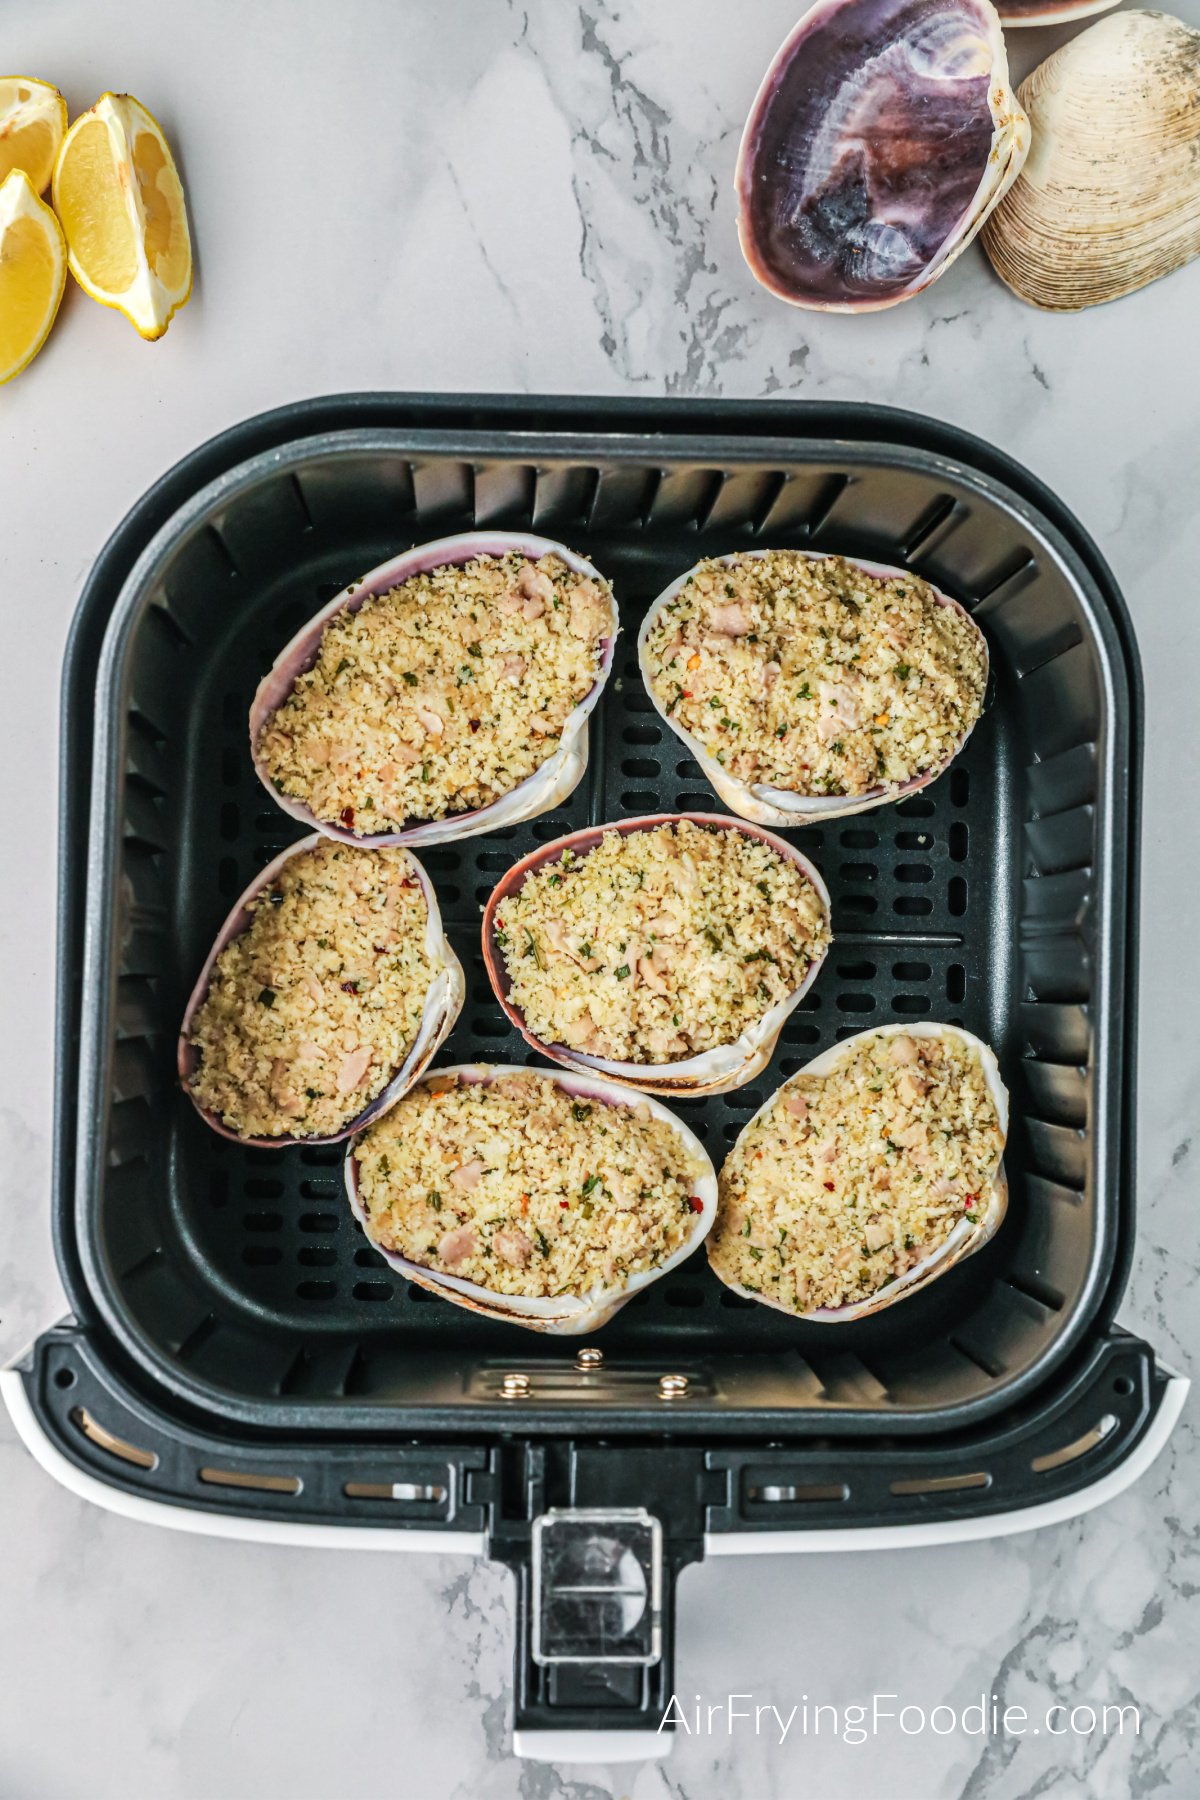 Stuffed clams in a single layer of the air fryer basket.